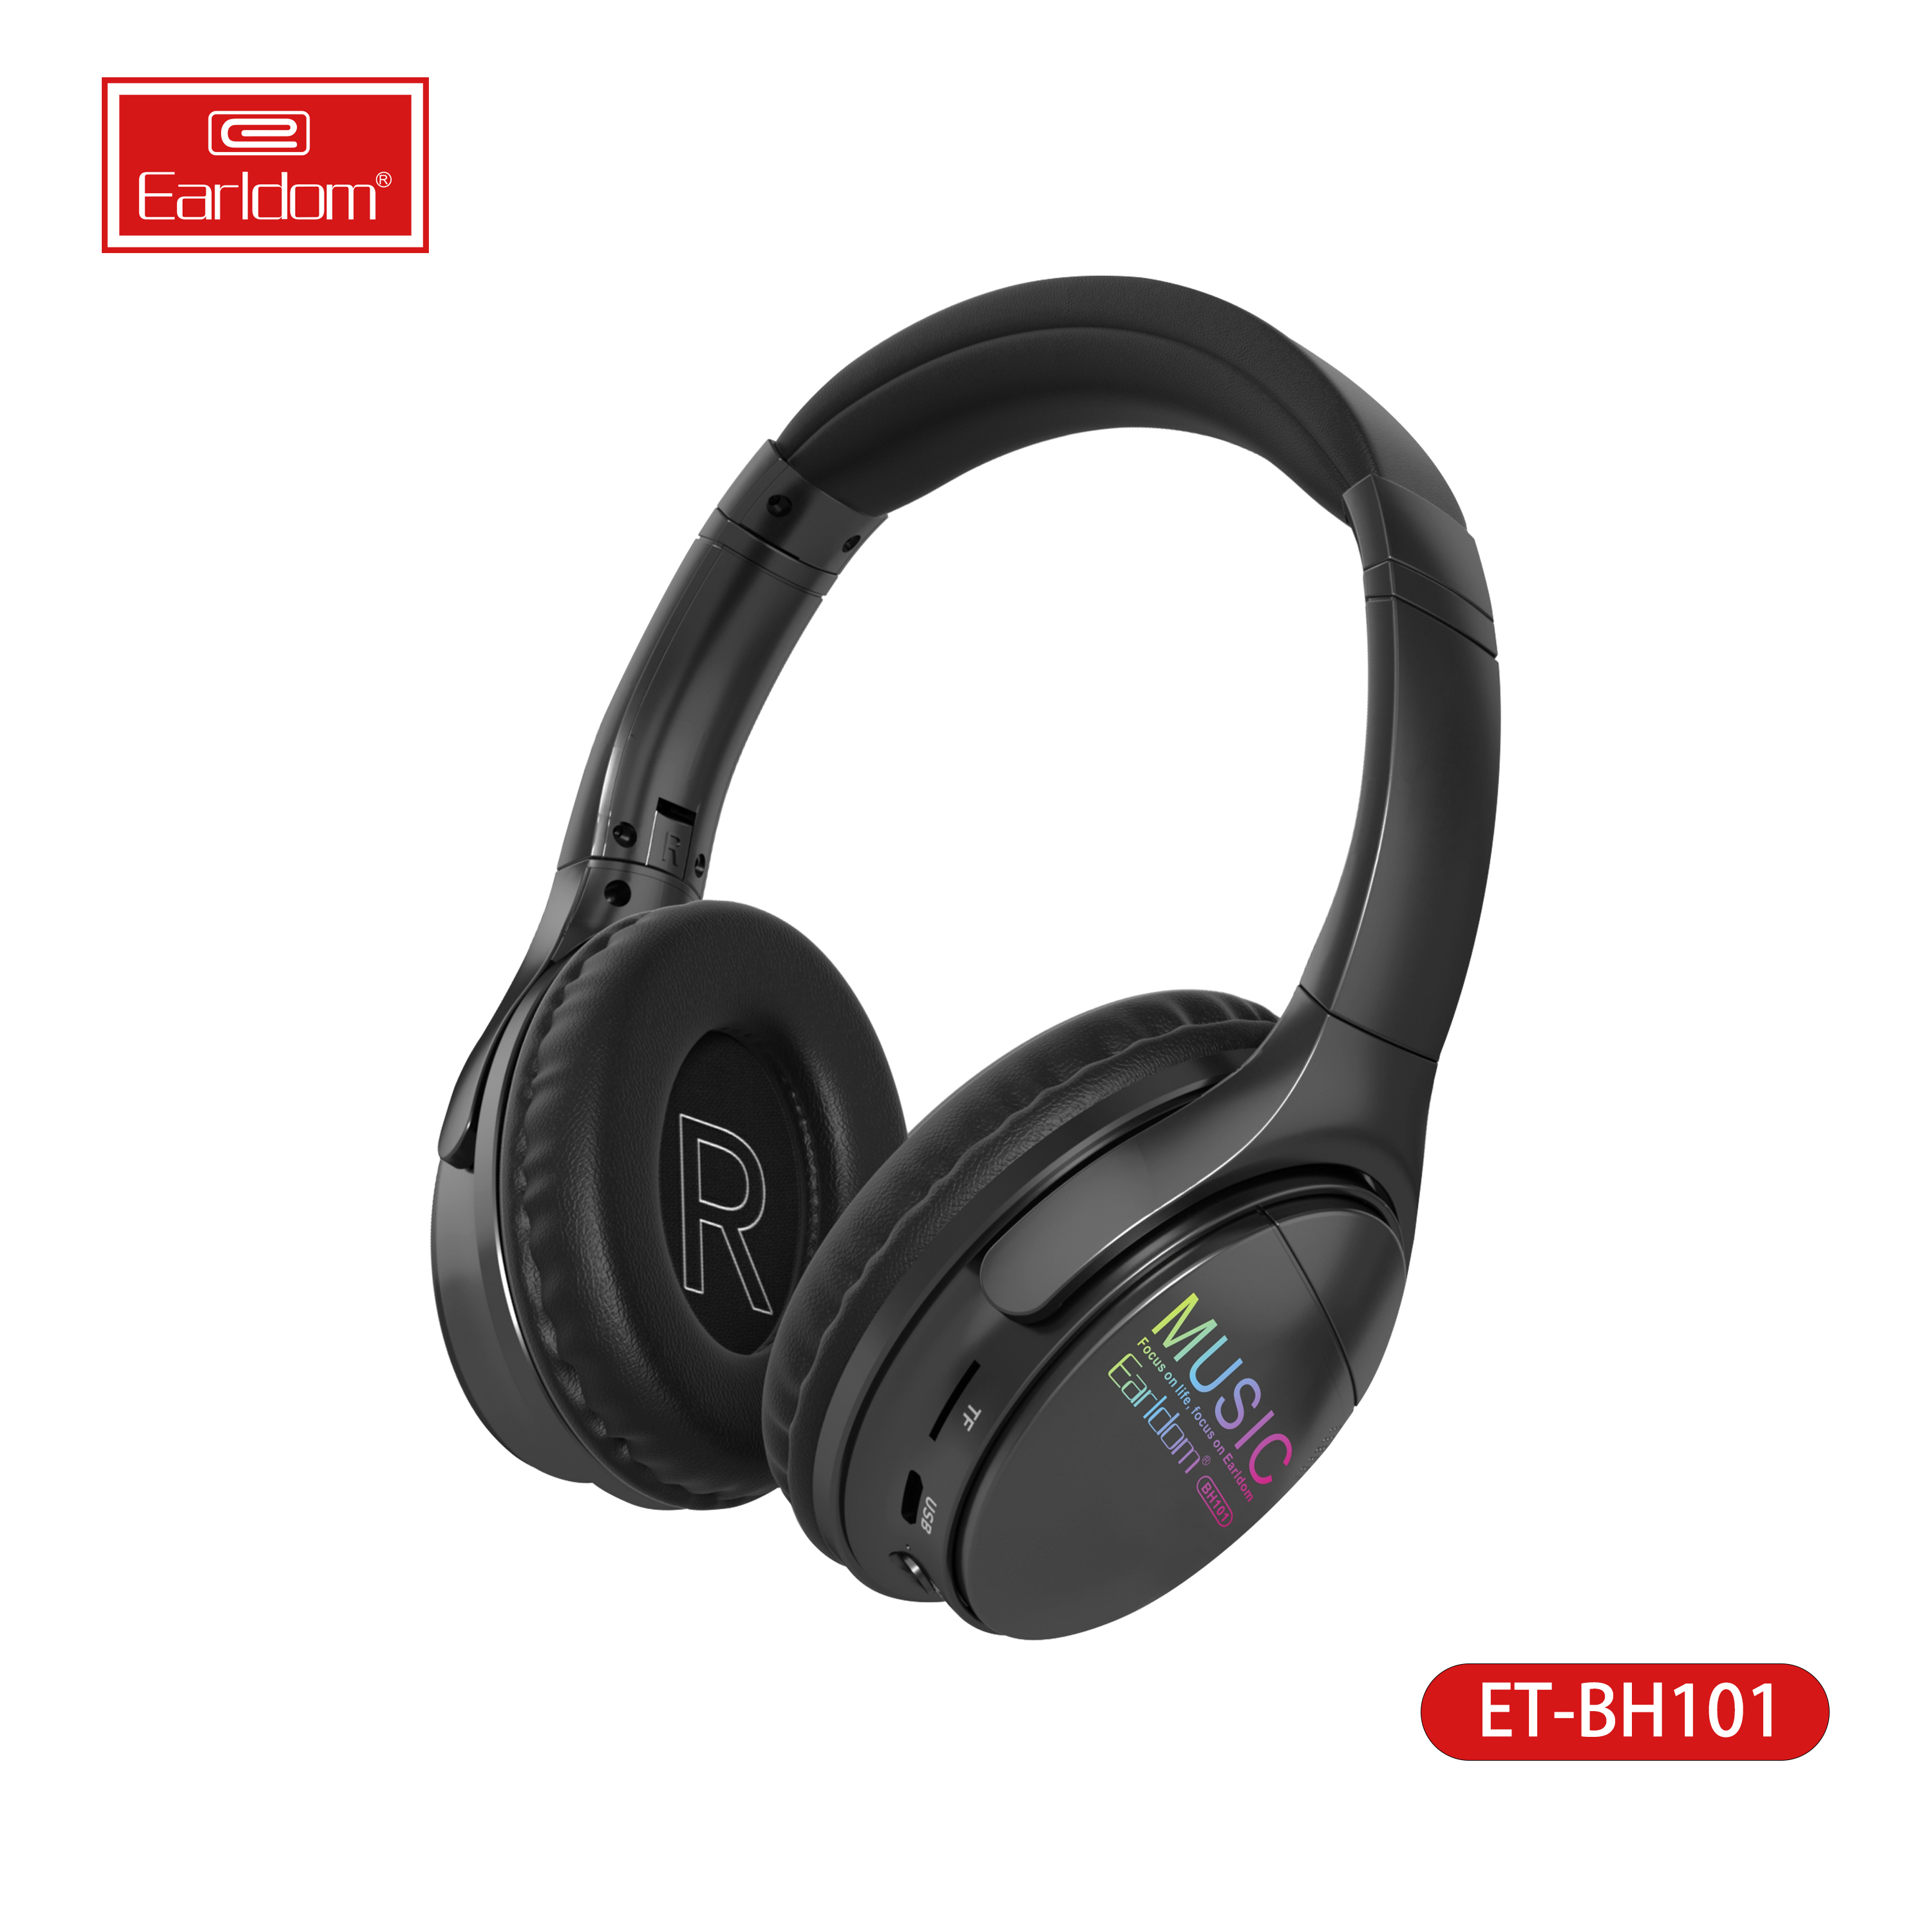 Earldom Wireless Active Noise Cancelling Headphones for Music Time Travel and Office Computer Headband Headphones